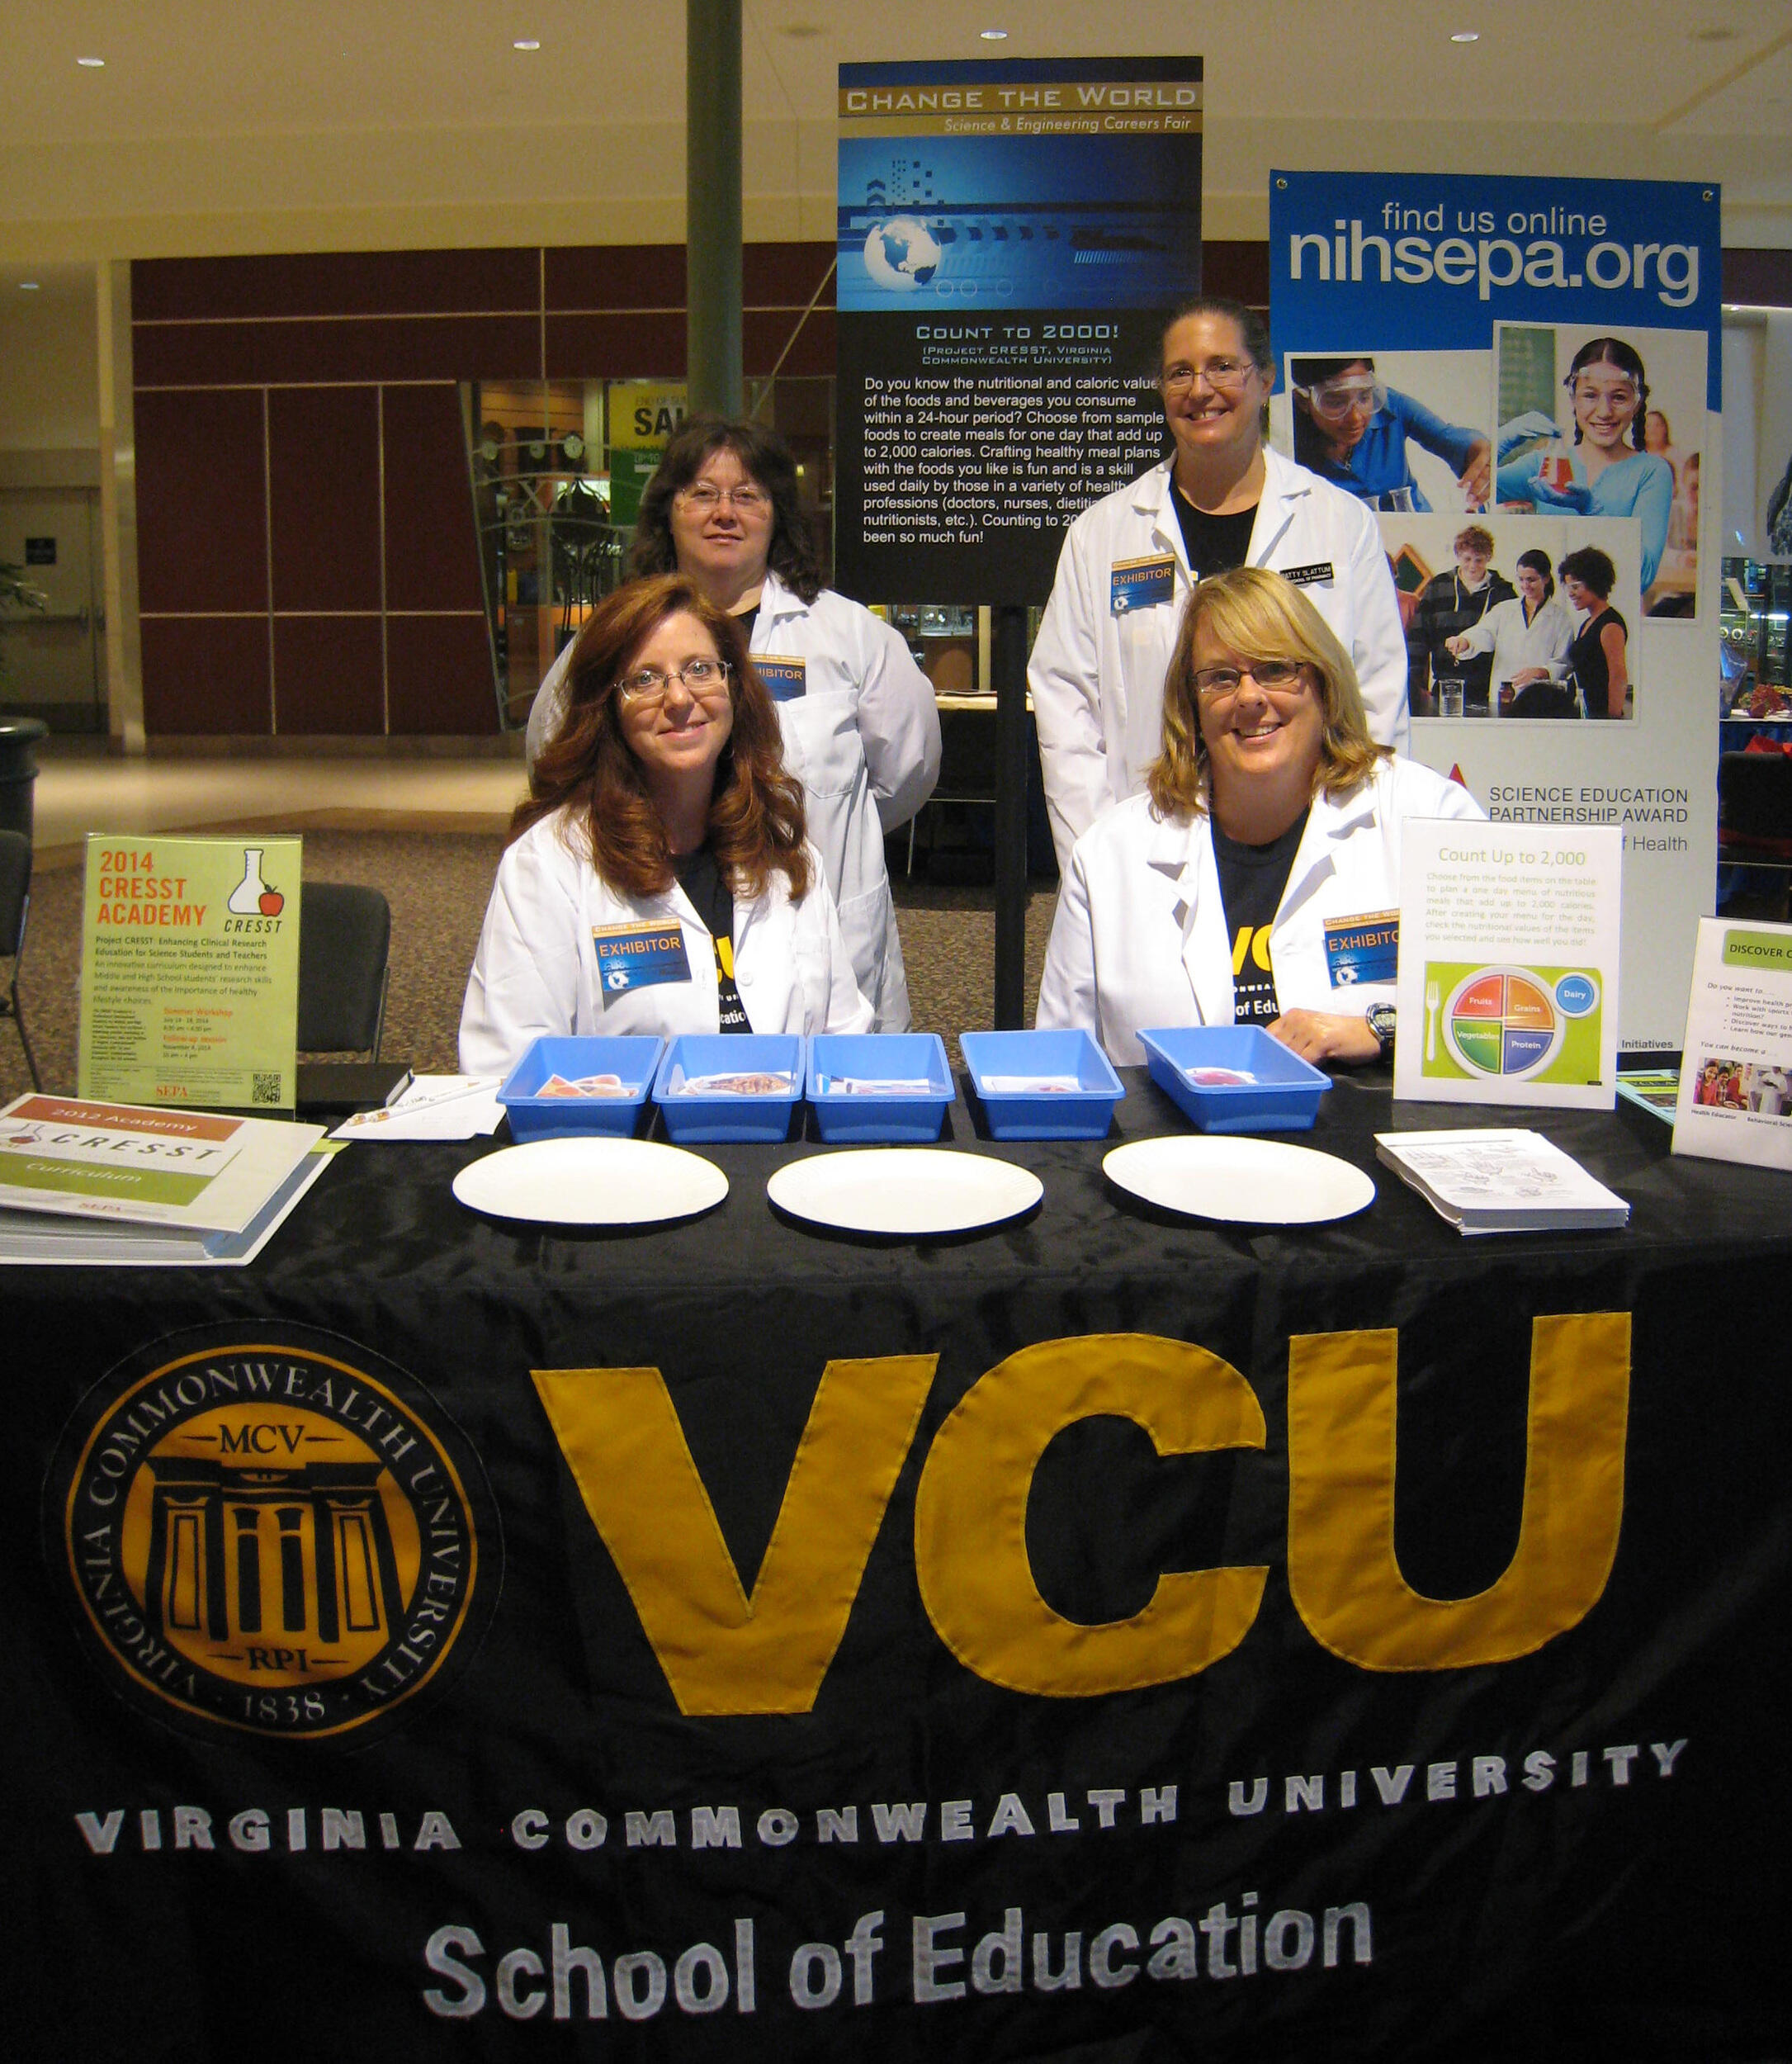 The CRESST team attends the World Science & Engineering Careers Fair in Northern Virginia, in spring 2013. From left to right: Tammy McKweon, Ph.D. student, School of Education; Lisa Abrams, Ph.D, interim chair, Foundations of Education Department in the School of Education; Suzanne Kirk, CRESST coordinator; and Patricia Slattum, Pharm.D., Ph.D., VCU Pharmacy